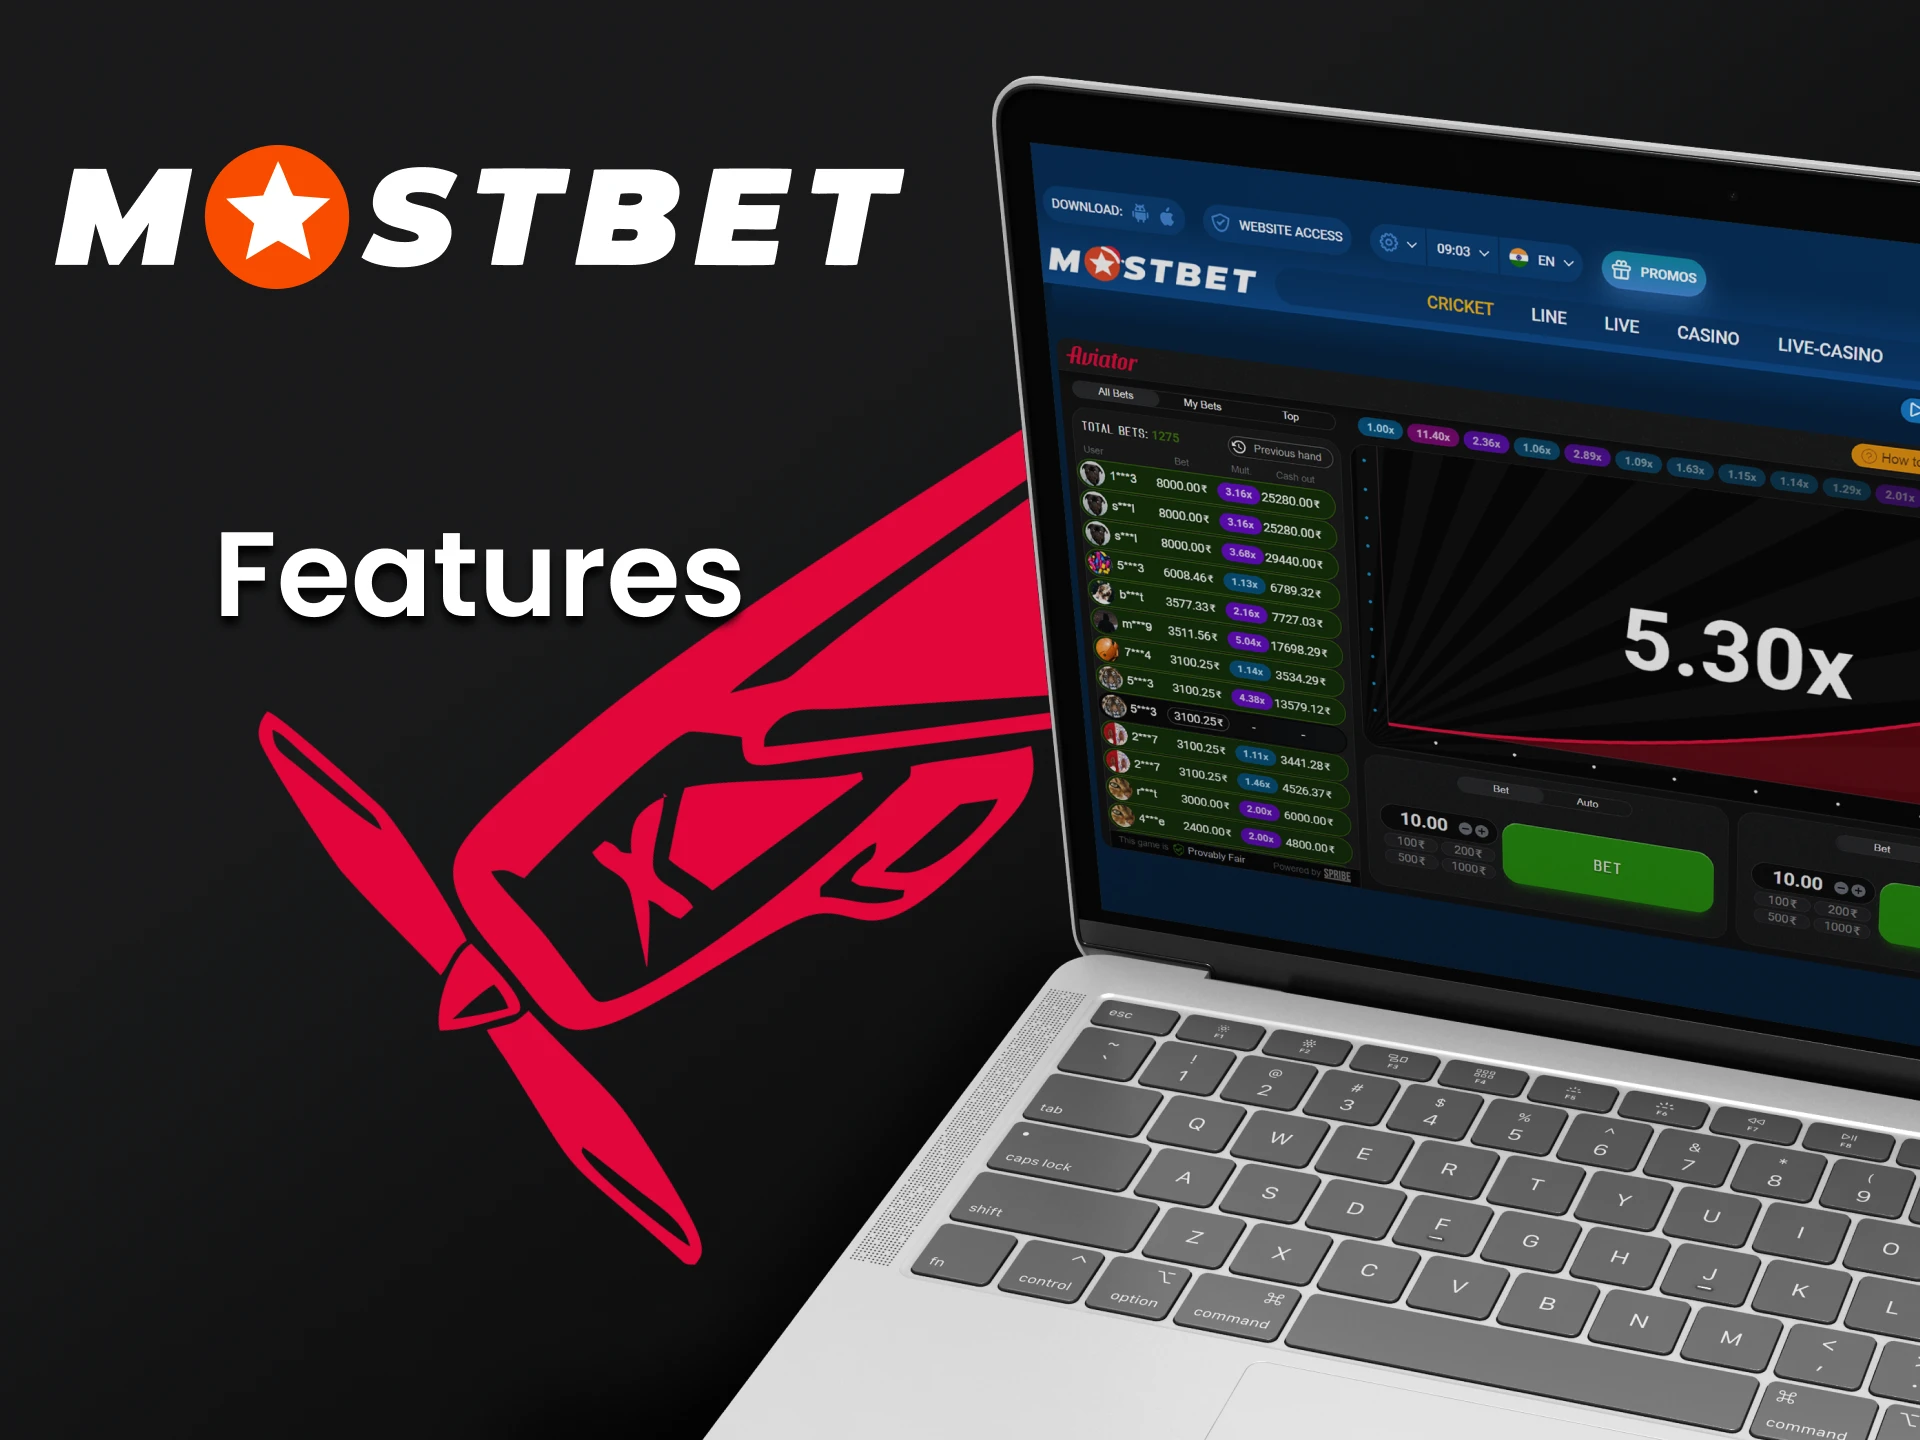 Mostbet is always improving its platform and in particular the Aviator game.